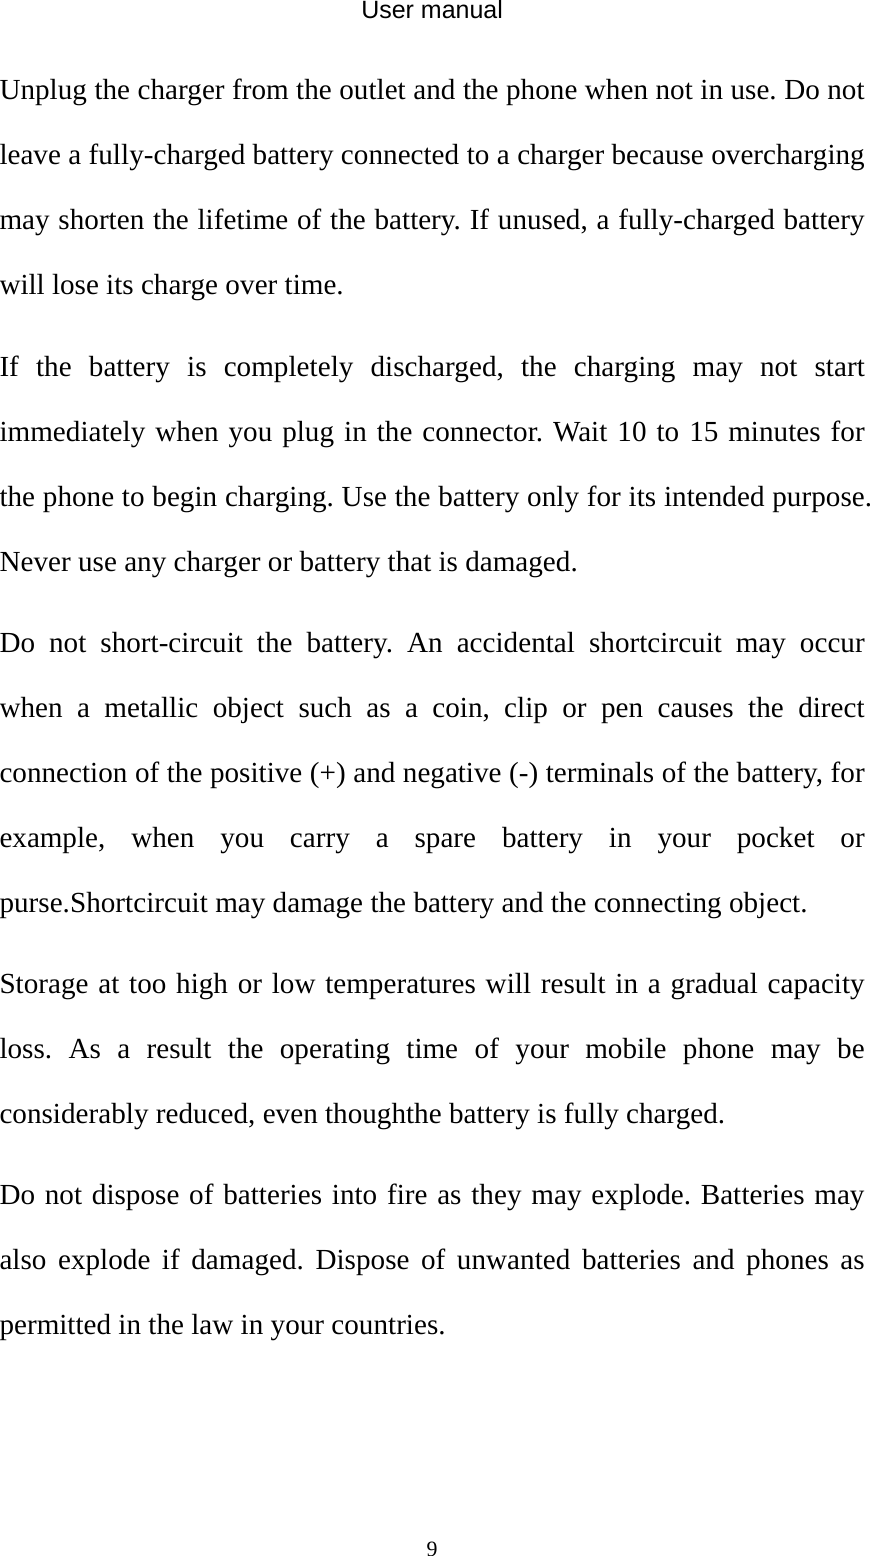 User manual  9Unplug the charger from the outlet and the phone when not in use. Do not leave a fully-charged battery connected to a charger because overcharging may shorten the lifetime of the battery. If unused, a fully-charged battery will lose its charge over time. If the battery is completely discharged, the charging may not start immediately when you plug in the connector. Wait 10 to 15 minutes for the phone to begin charging. Use the battery only for its intended purpose. Never use any charger or battery that is damaged. Do not short-circuit the battery. An accidental shortcircuit may occur when a metallic object such as a coin, clip or pen causes the direct connection of the positive (+) and negative (-) terminals of the battery, for example, when you carry a spare battery in your pocket or purse.Shortcircuit may damage the battery and the connecting object. Storage at too high or low temperatures will result in a gradual capacity loss. As a result the operating time of your mobile phone may be considerably reduced, even thoughthe battery is fully charged. Do not dispose of batteries into fire as they may explode. Batteries may also explode if damaged. Dispose of unwanted batteries and phones as permitted in the law in your countries.   